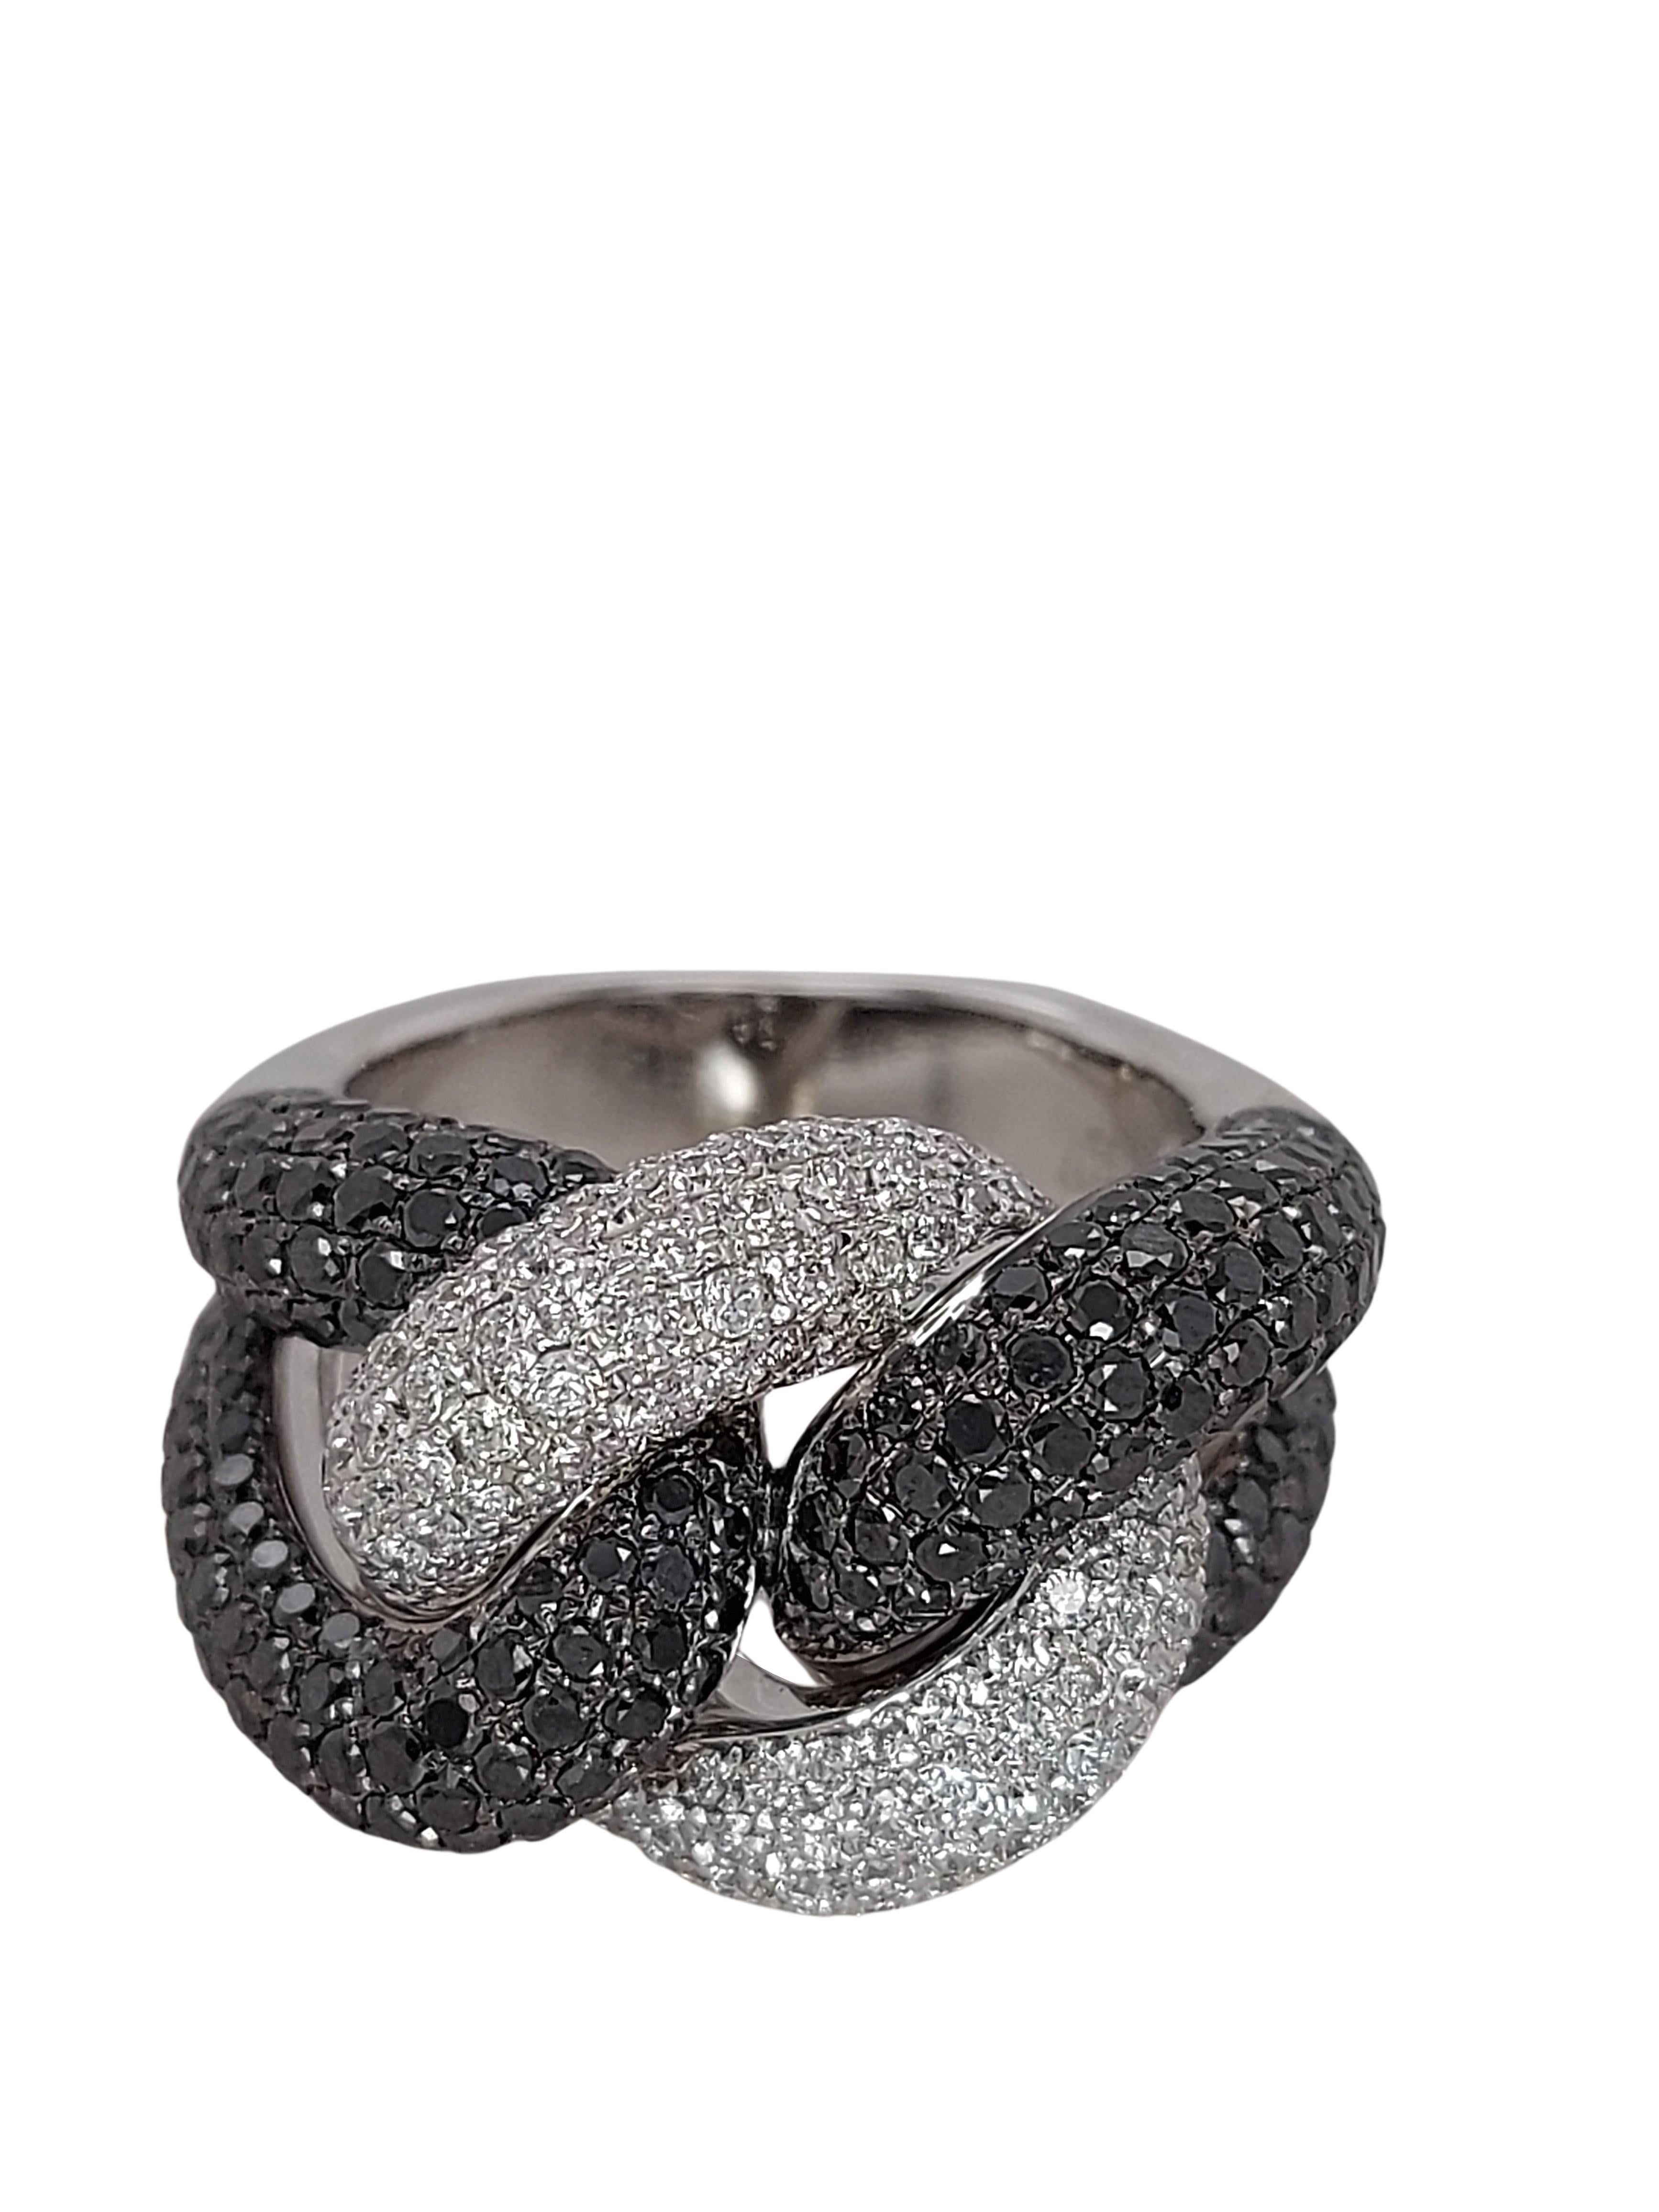 18 White Gold Ring With 1.17ct White and 2.30ct Black Diamonds

Diamonds: Brilliant cut diamonds, White diamonds 1.17ct & black diamonds 2.30ct

Material: 18kt white gold

Ring size: 55.1 EU / 7.25 US ( Can be resized for free)

Total weight: 15.6